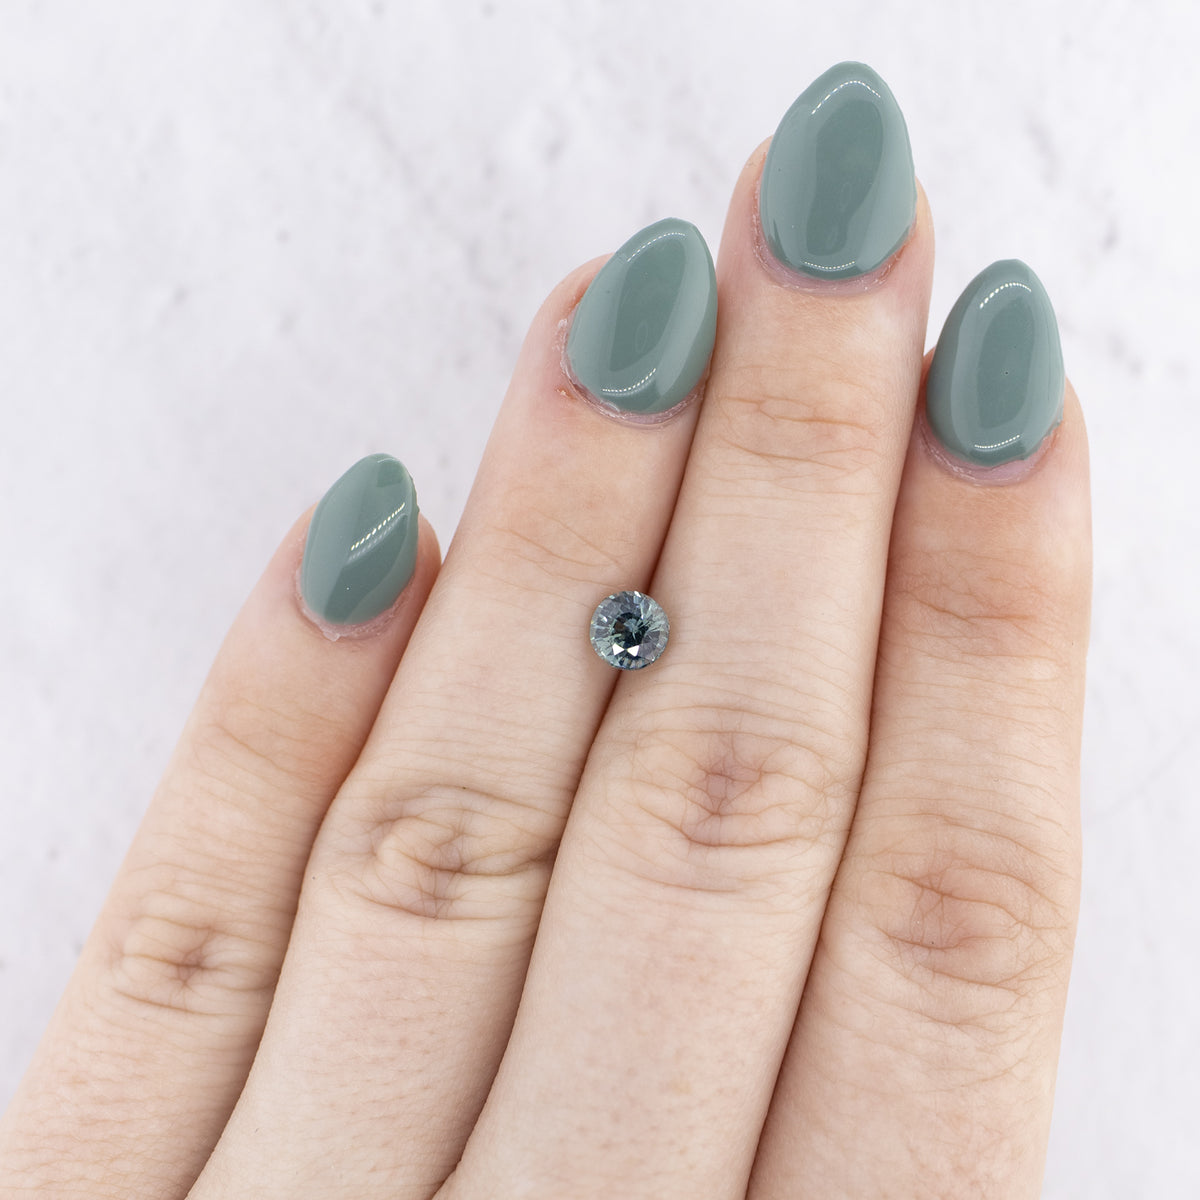 0.90ct Teal Bicolor Round Natural Sapphire